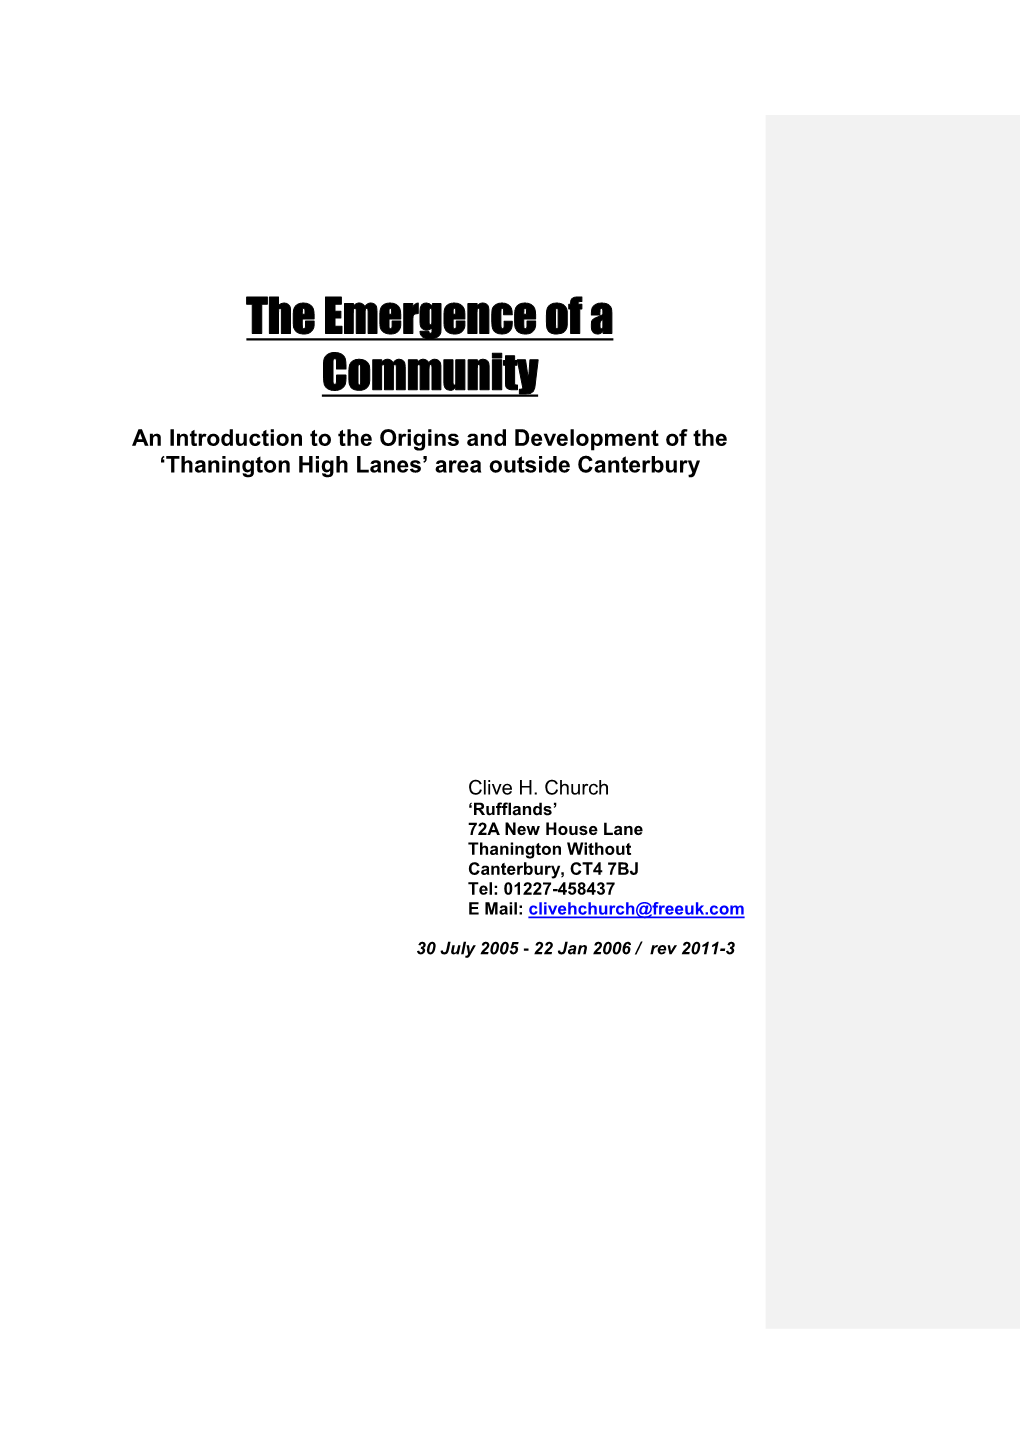 The Emergence of a Community